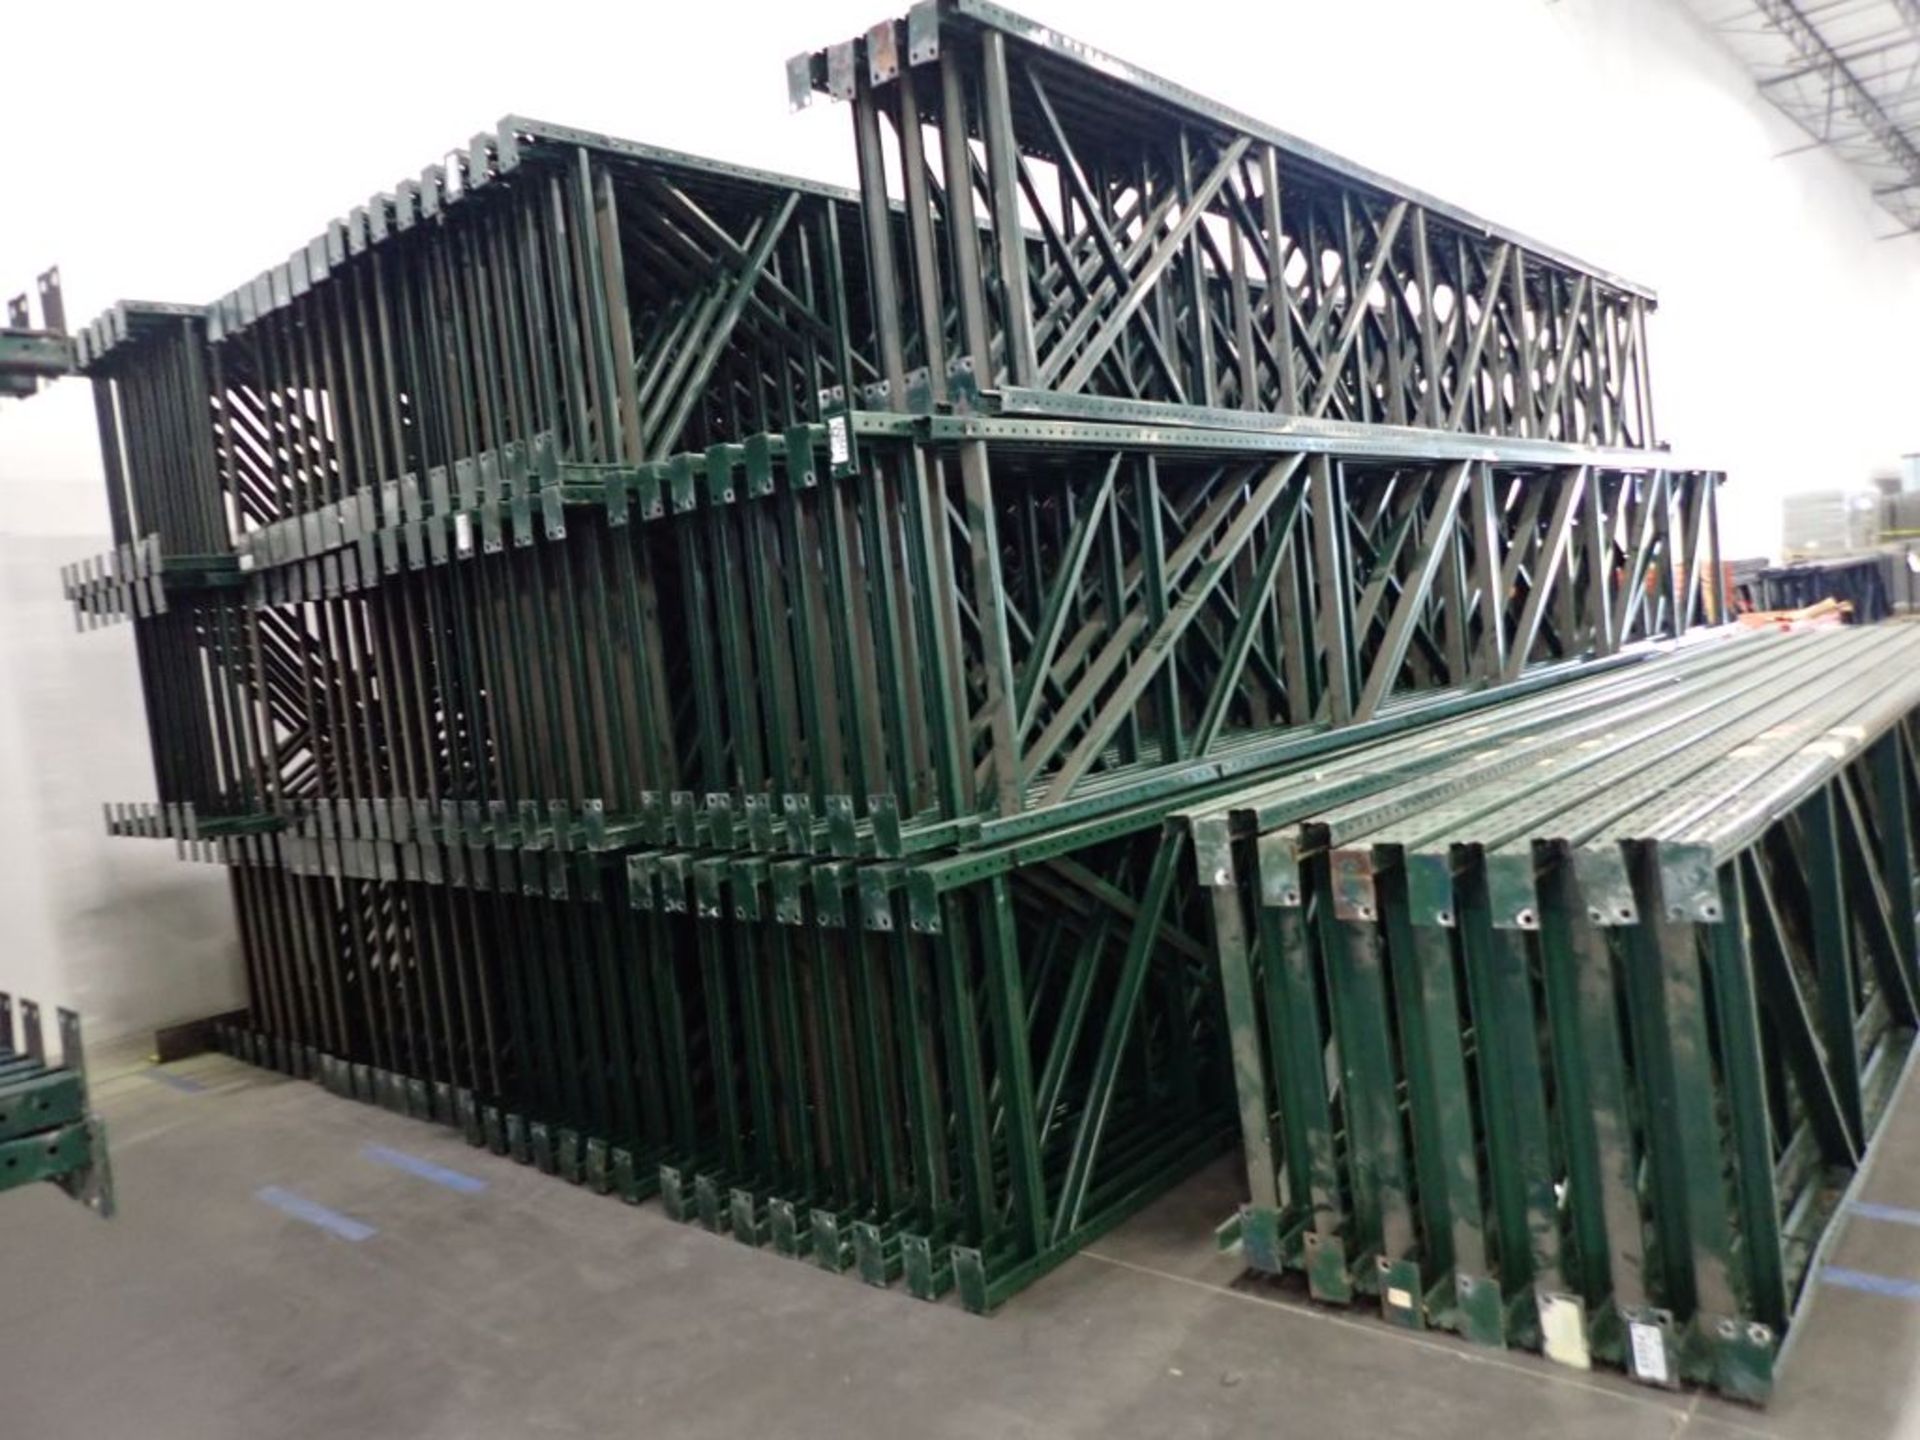 Lot of (15) 24' RUR Slotted Rolled Column Uprights